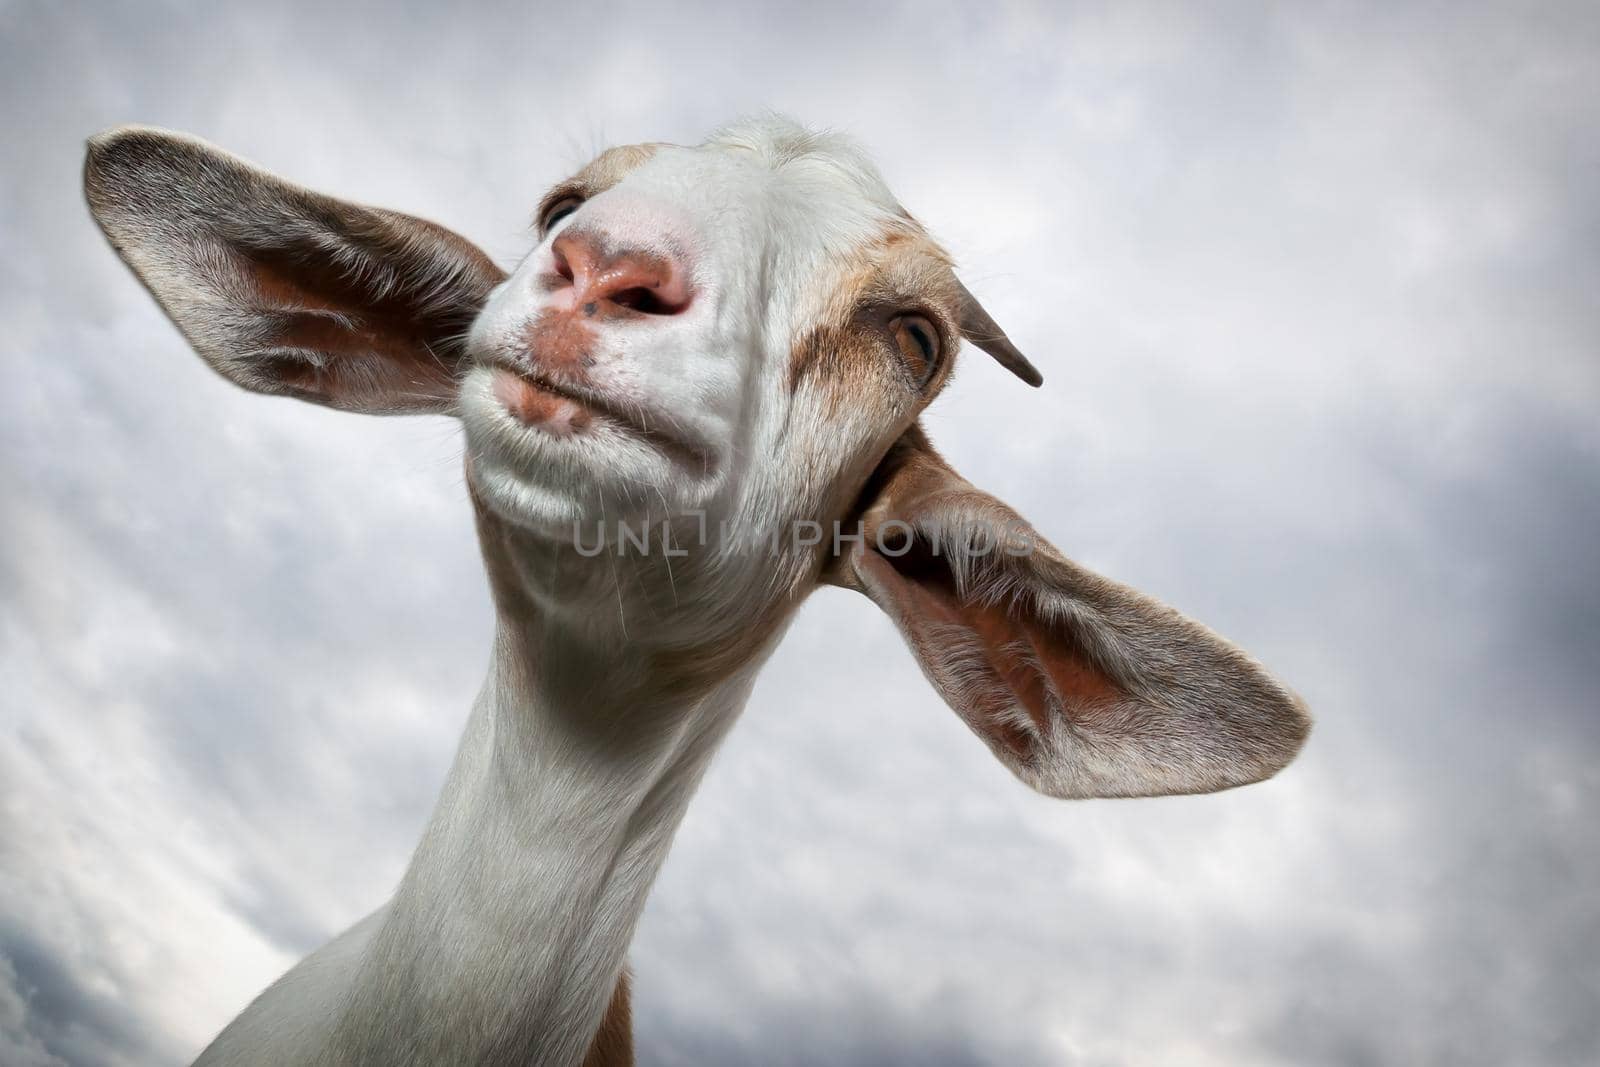 Goat with big ears in the sky background